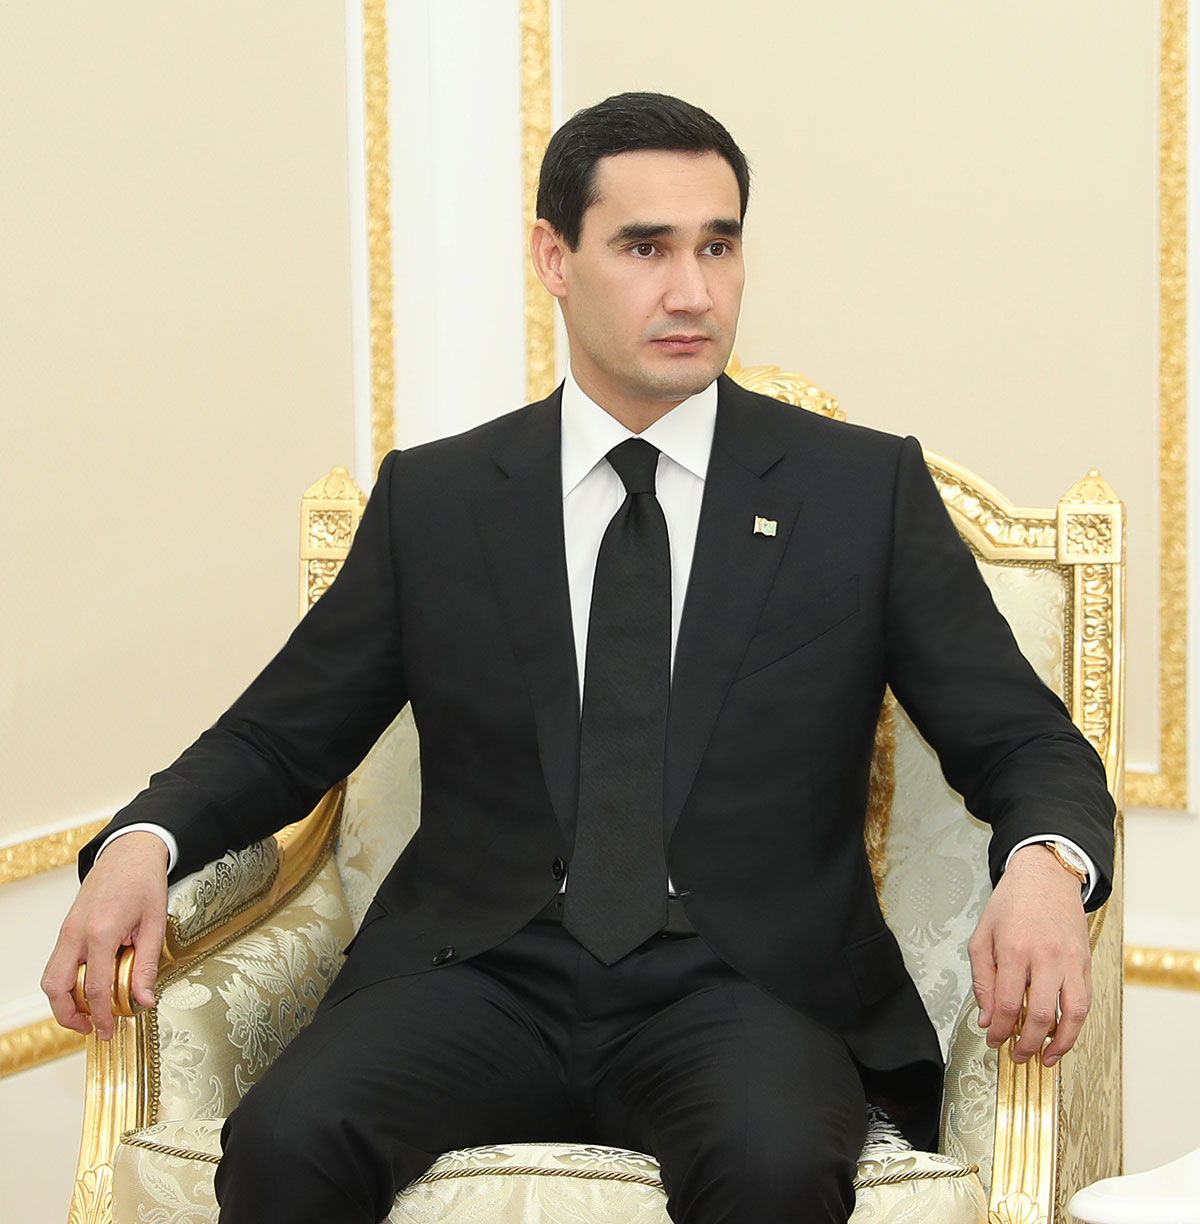 The President of Turkmenistan received the CEO of Bouygues